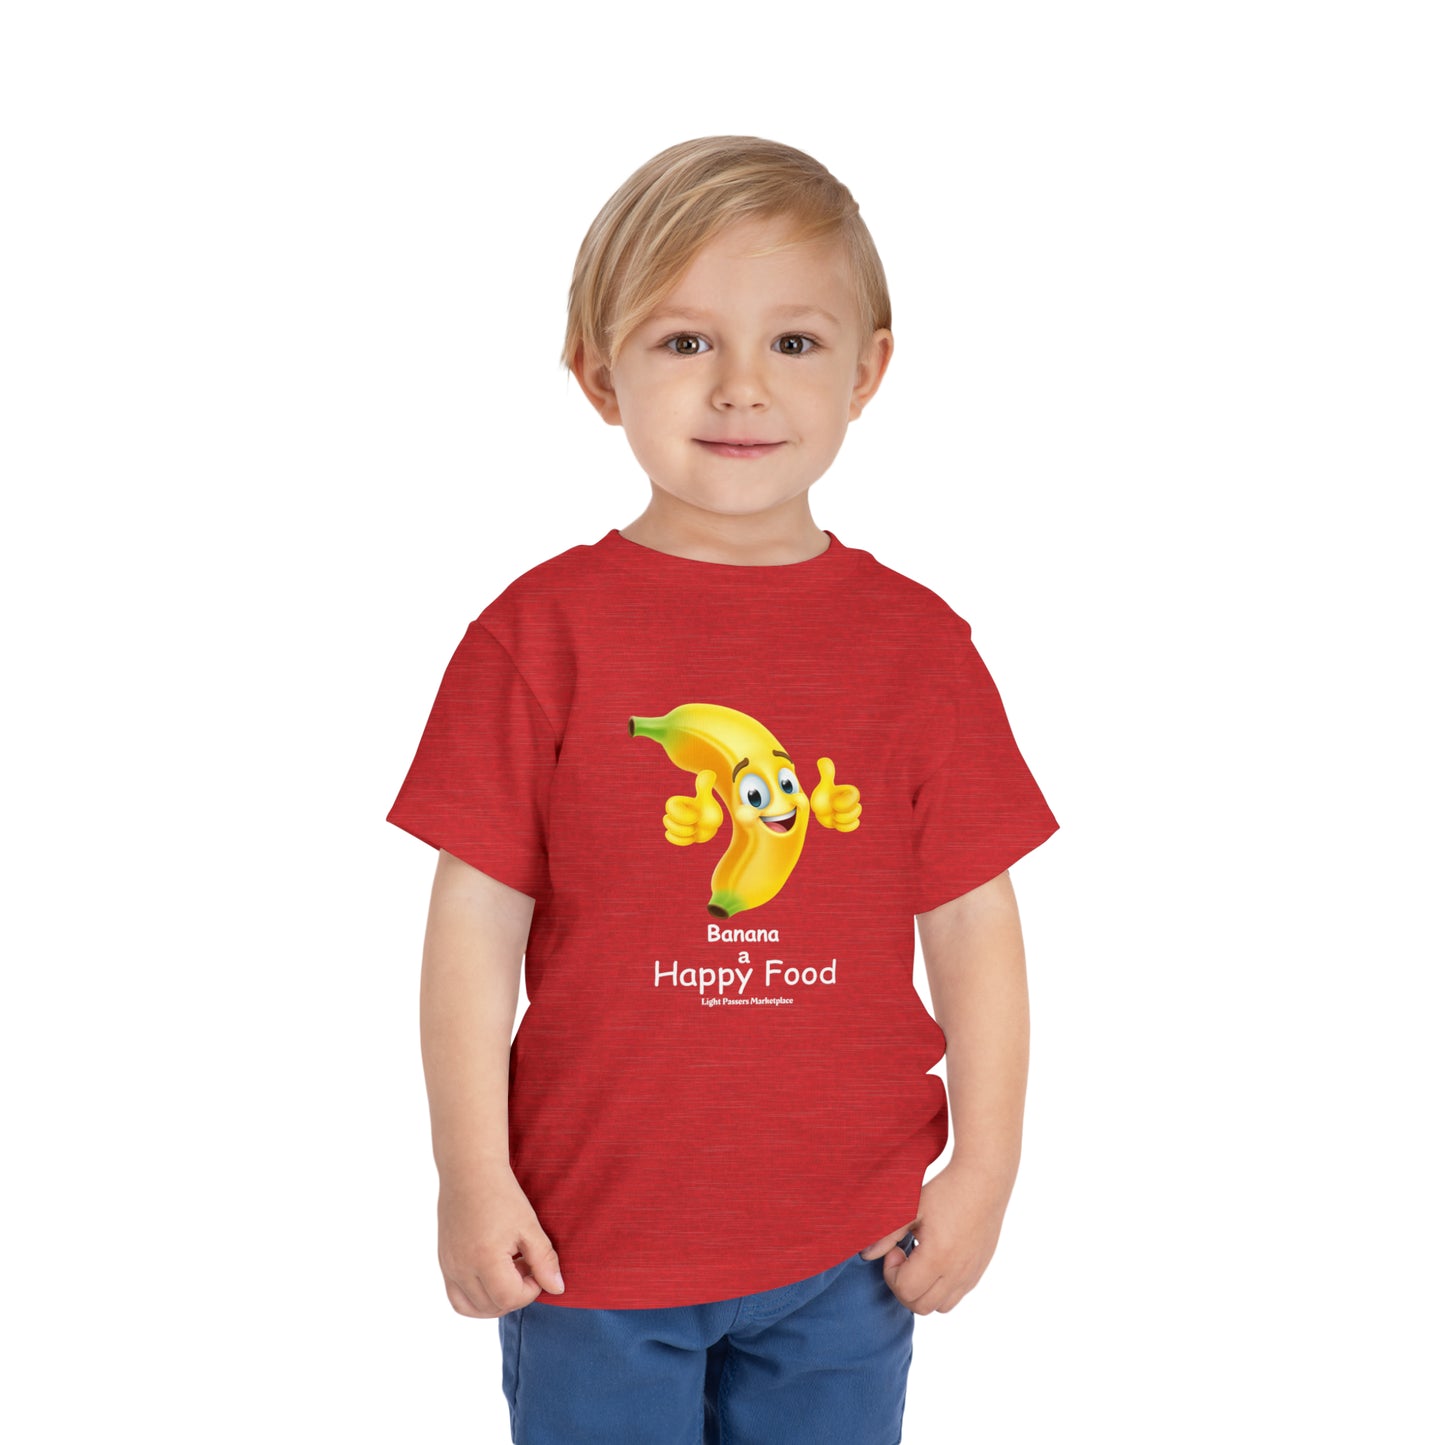 Light Passers Marketplace Banana Happy Food Toddler T-shirt Nutrition, Mental Health